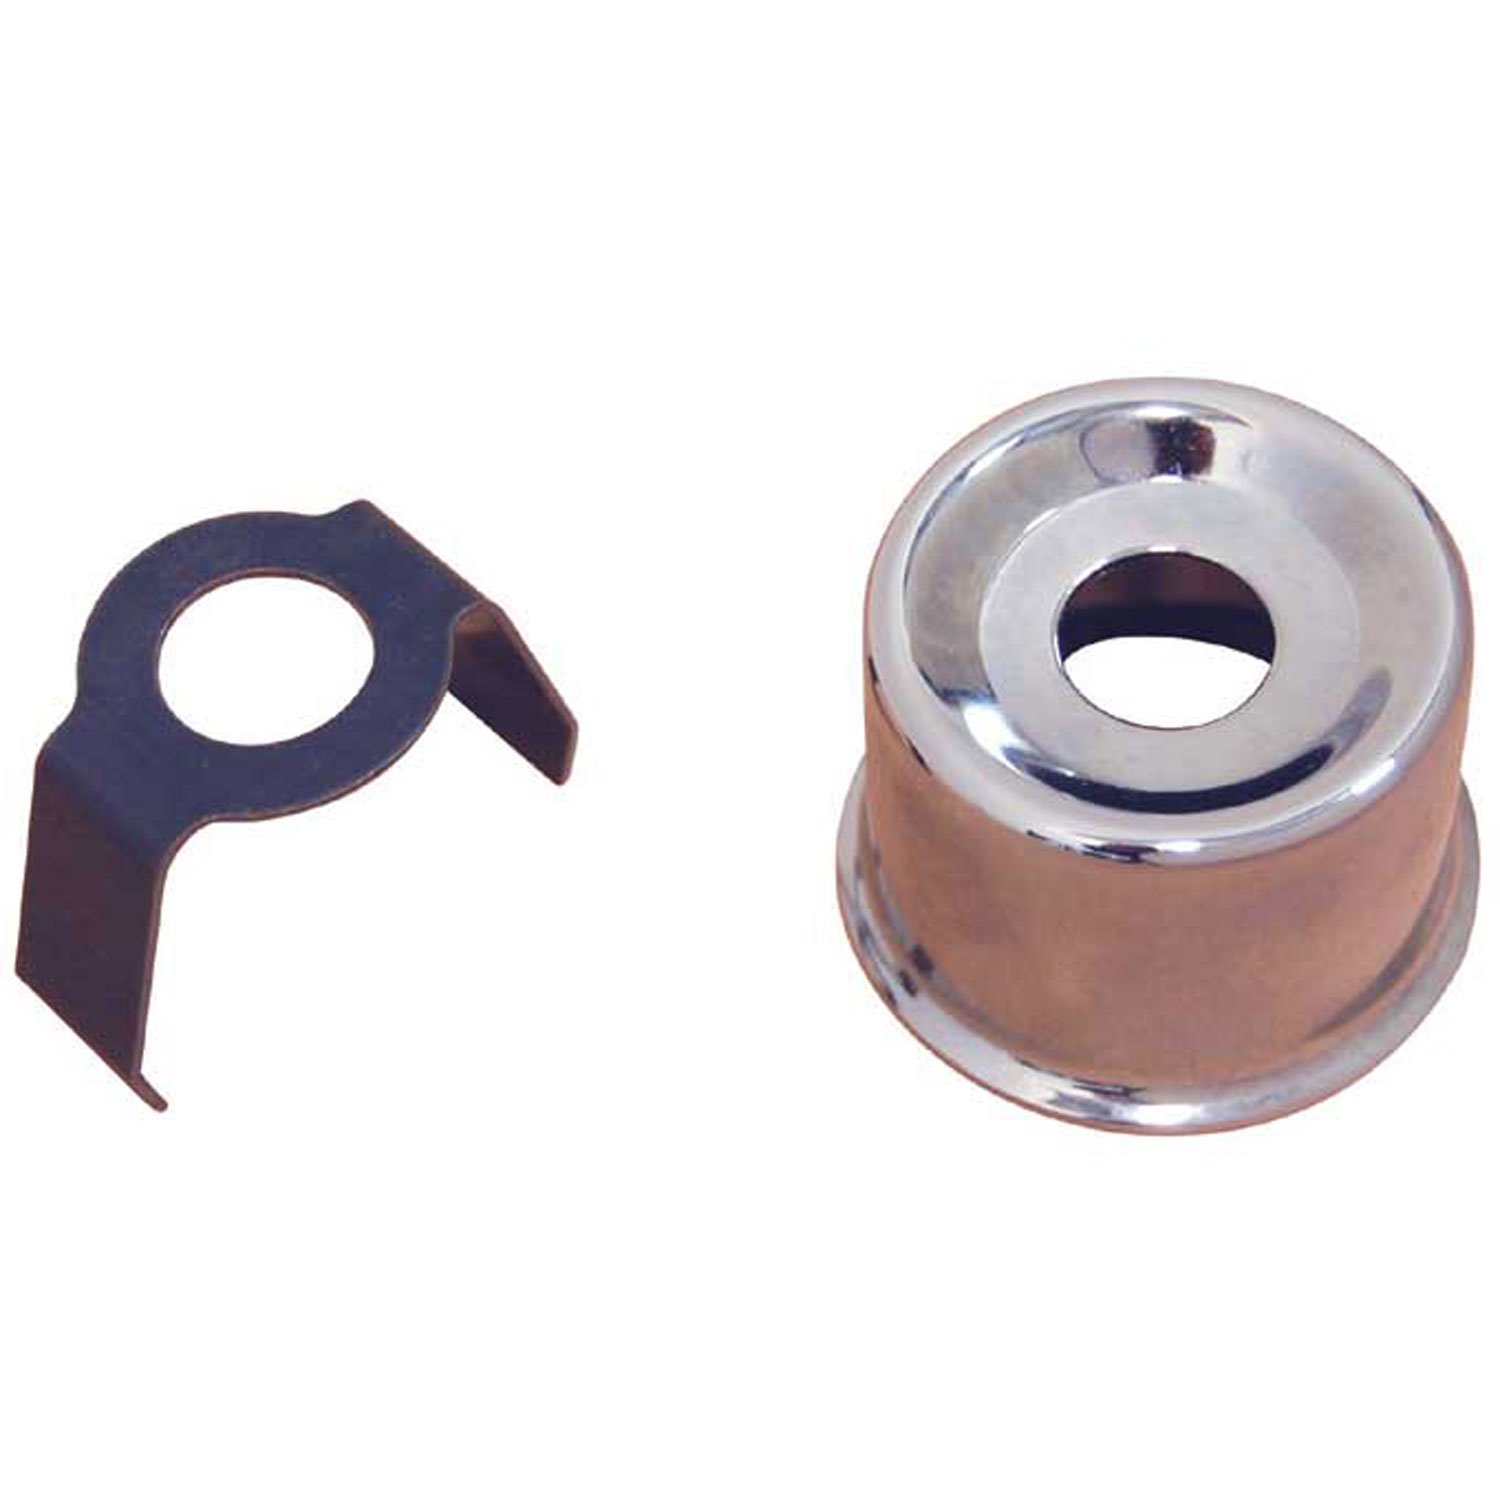 Oil Filler Breather Cap with PCV Mount for